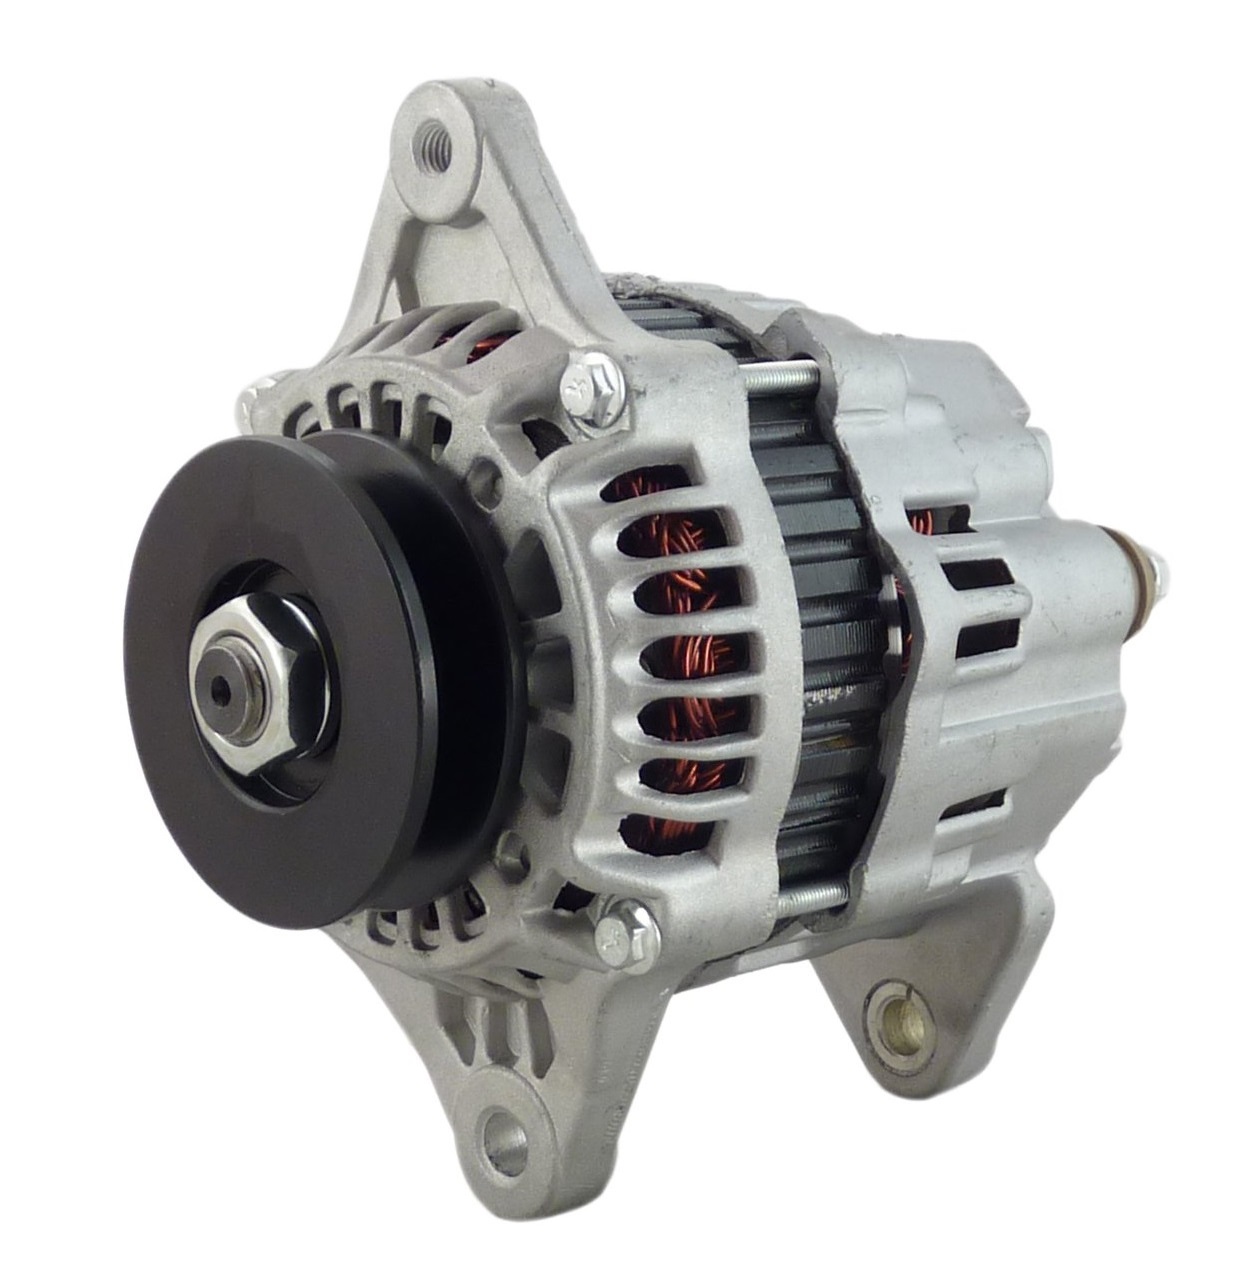 Forklift Alternator for Yale Hyster A7T03277 A7T03277A A7TA2283 7000215 1361853 1450928 3068342 3123908 800045600 S5SN-18-300 S5SN-18-300A 00591-33580-81 00591-55973-81 1500145-04 2690027-70 5059605-6